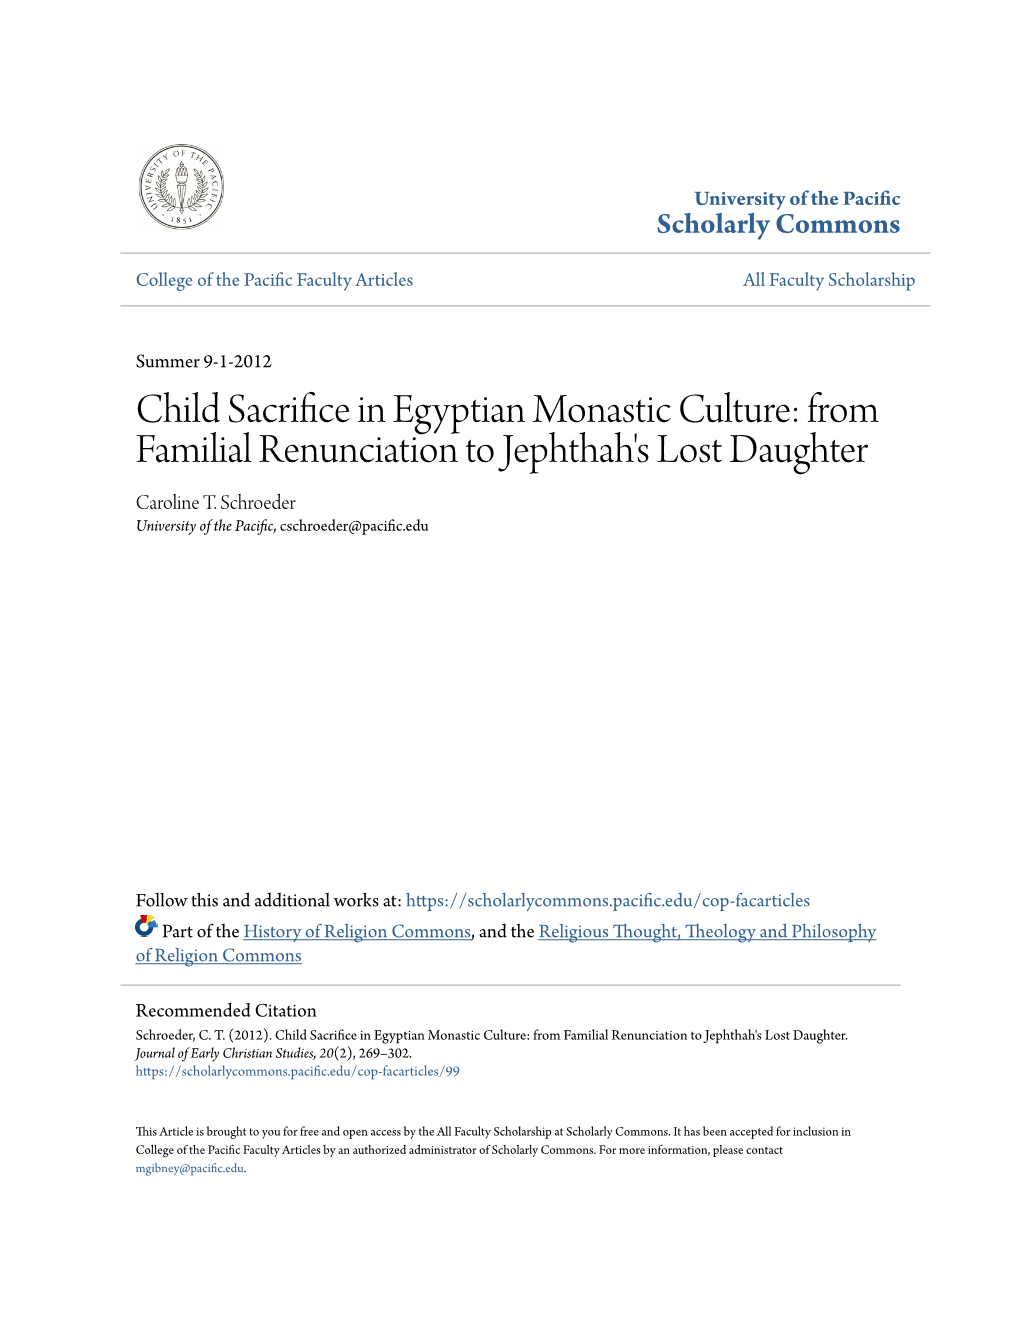 Child Sacrifice in Egyptian Monastic Culture: from Familial Renunciation to Jephthah's Lost Daughter